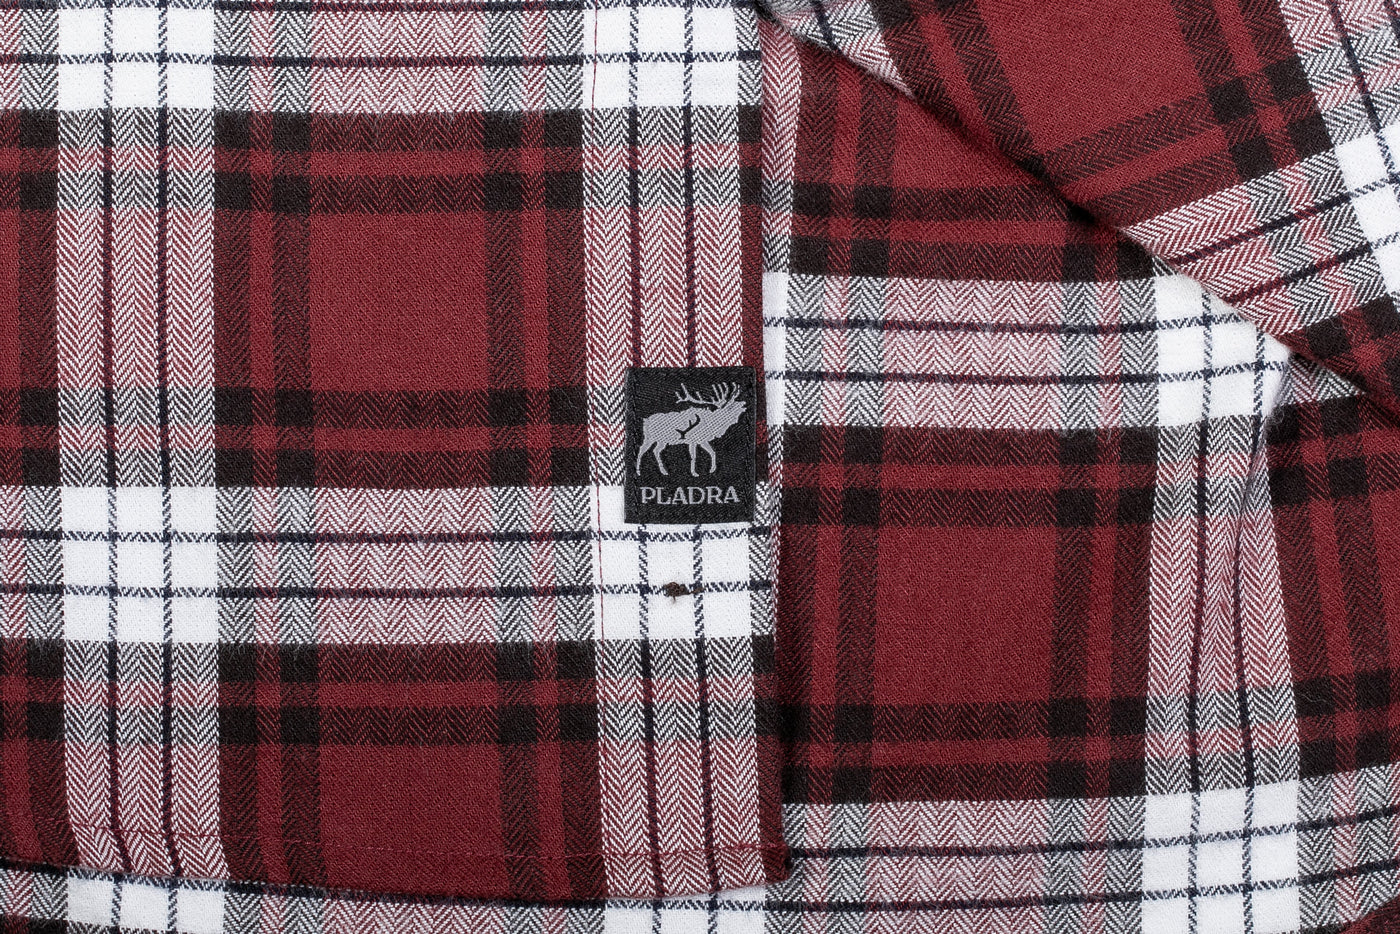 Men's Every Day Flannel Shirt- RK Montrose Maroon